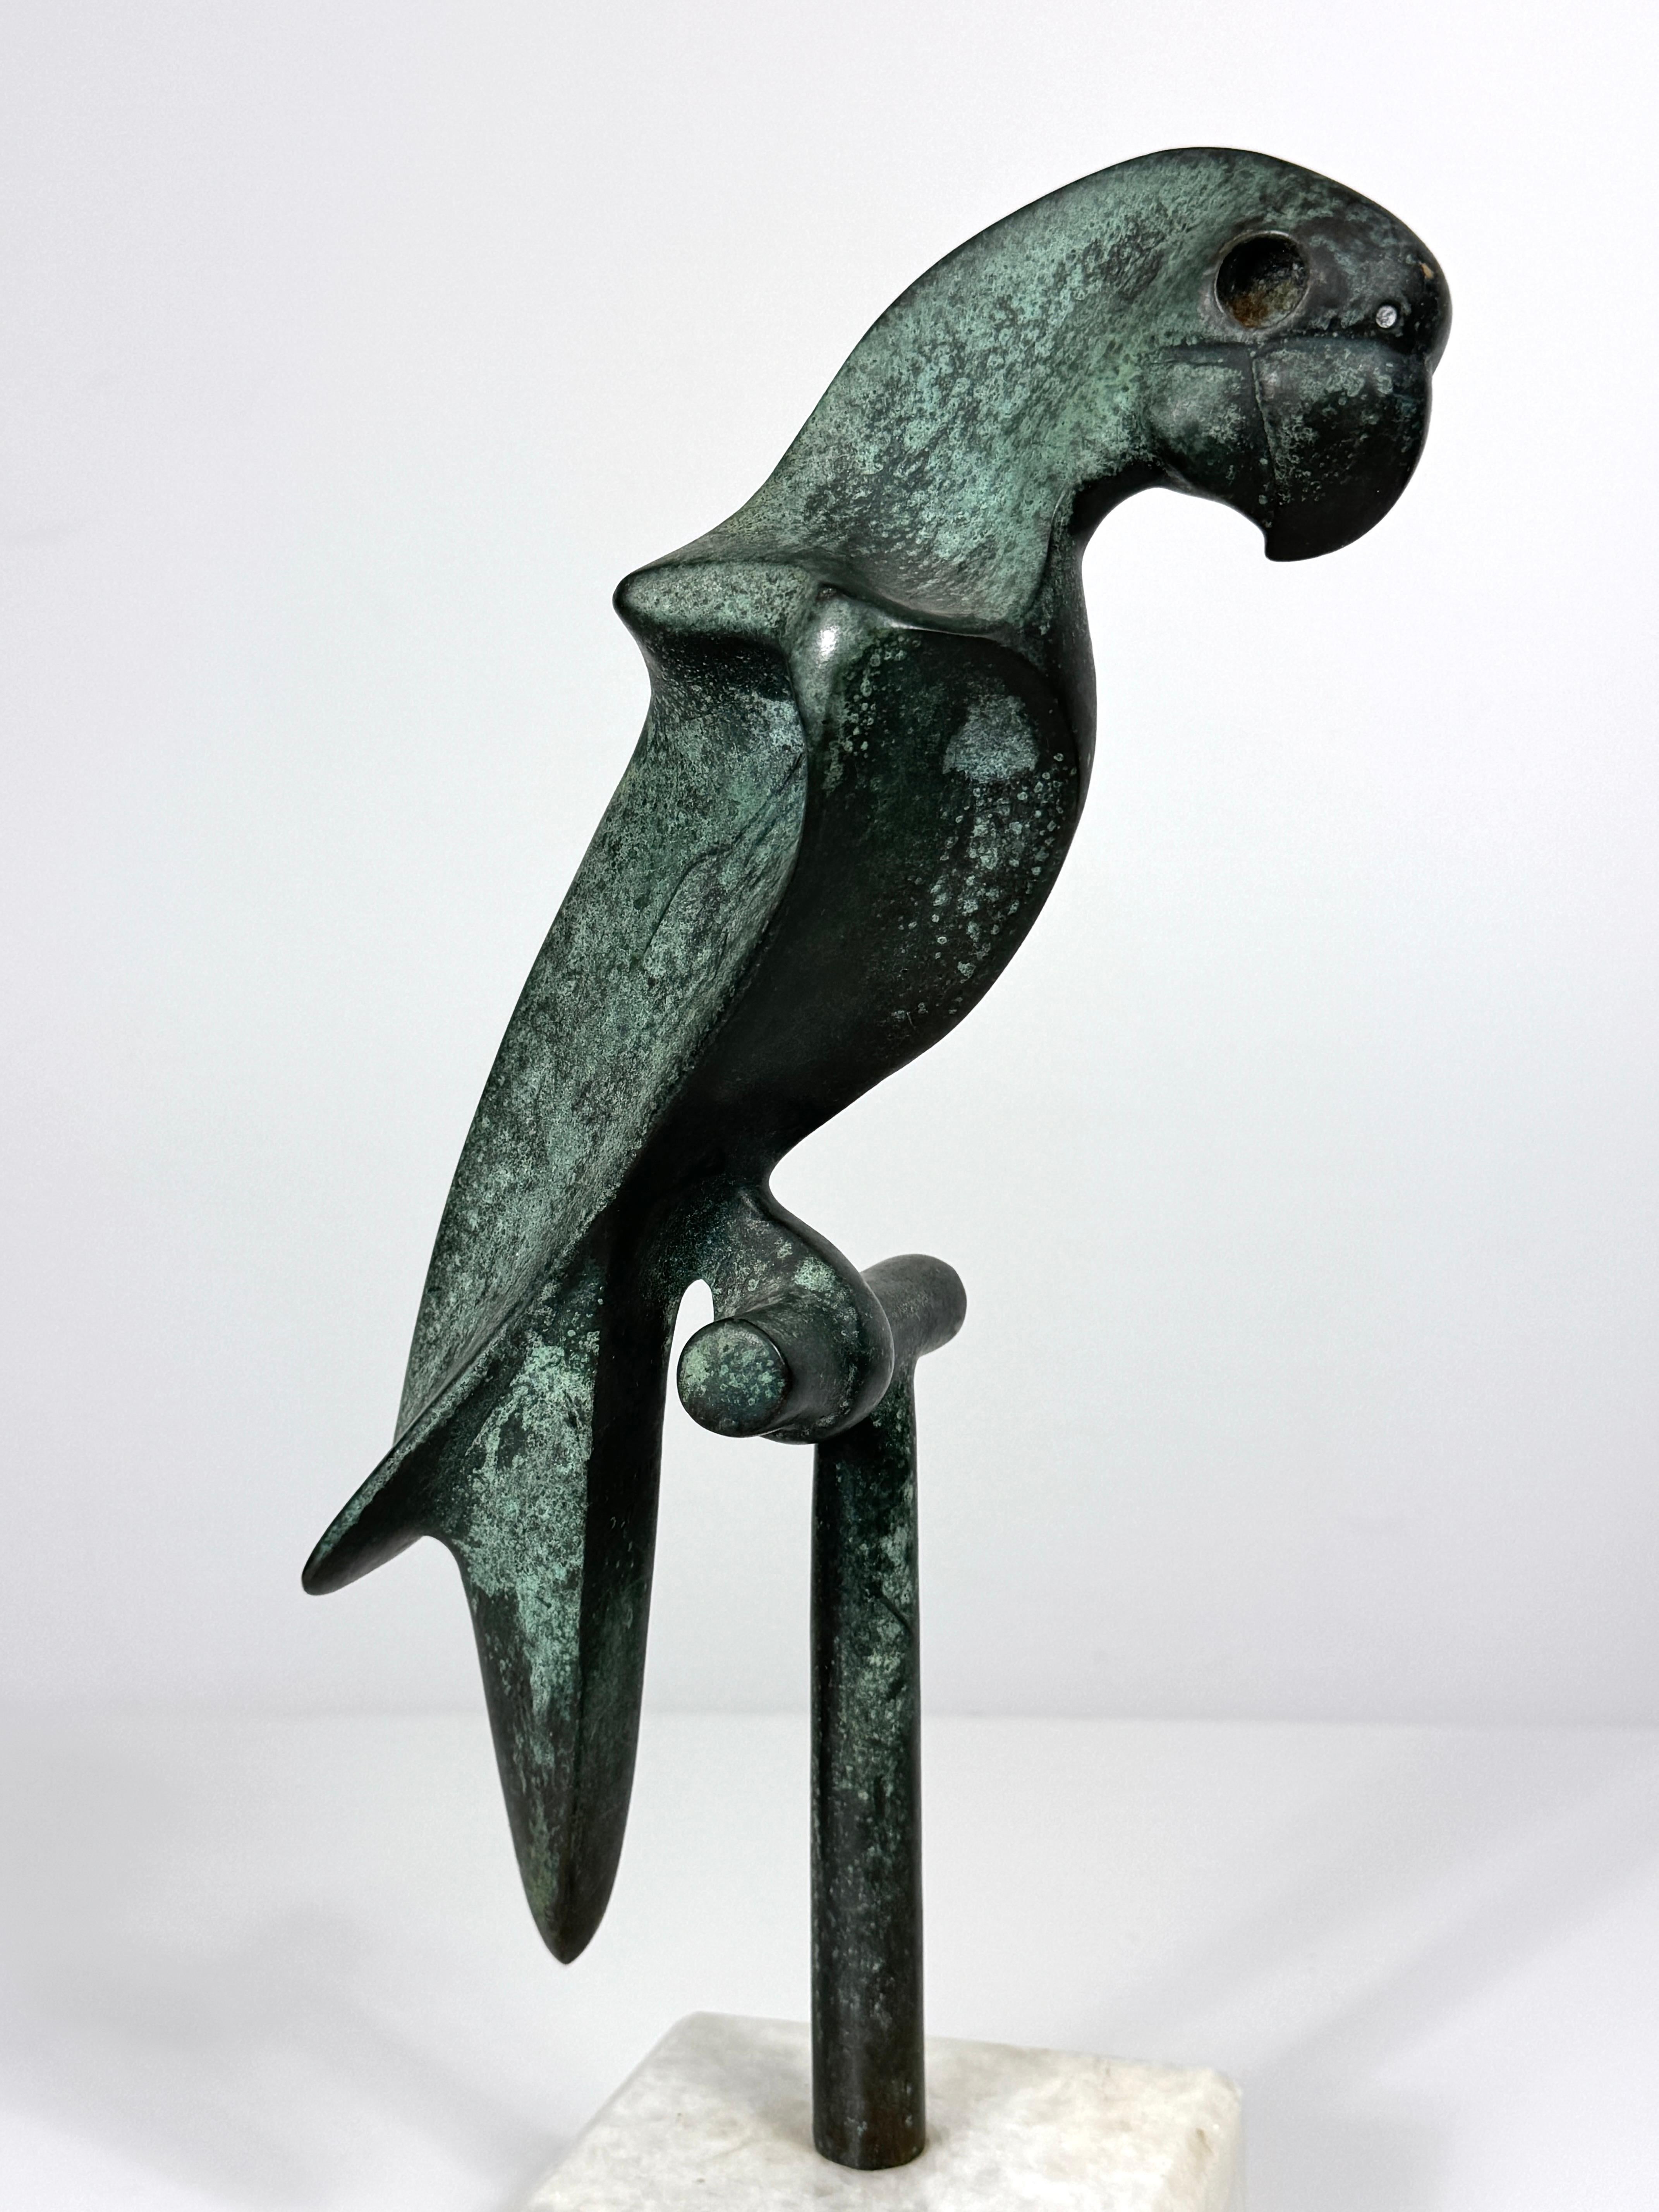 Modernist parrot sculpture by Hattakitkosol Somchai circa 1970s
Solid bronze parrot on perch with verdigris finish mounted to white marble base
Signed and numbered

5.5 inch width
5 inch depth
14 inch height